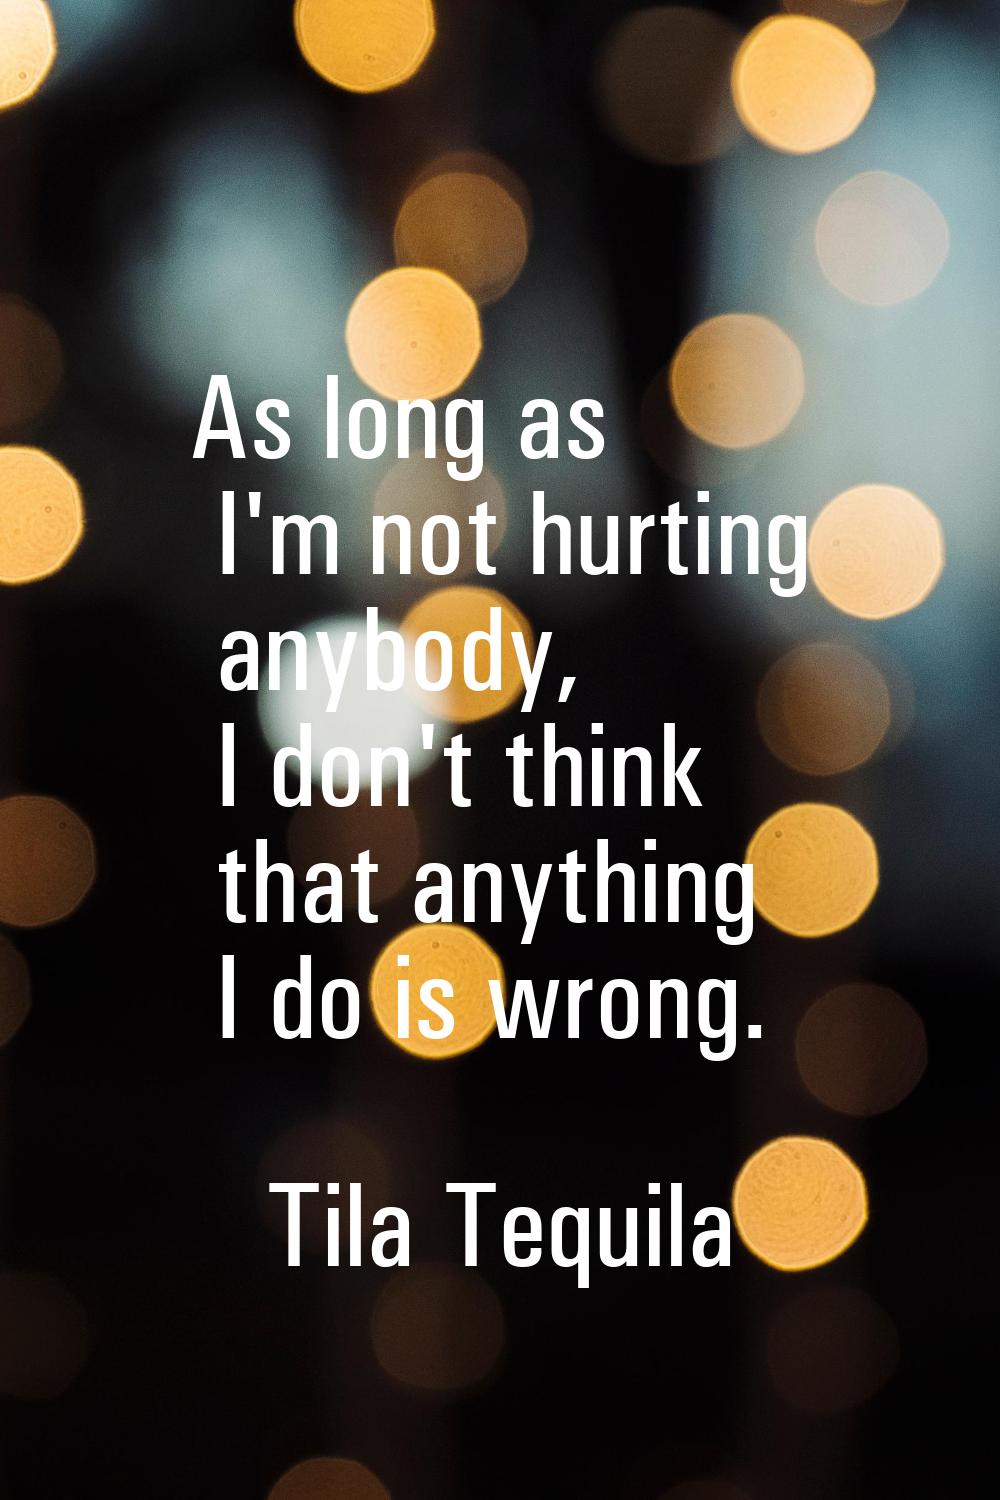 As long as I'm not hurting anybody, I don't think that anything I do is wrong.